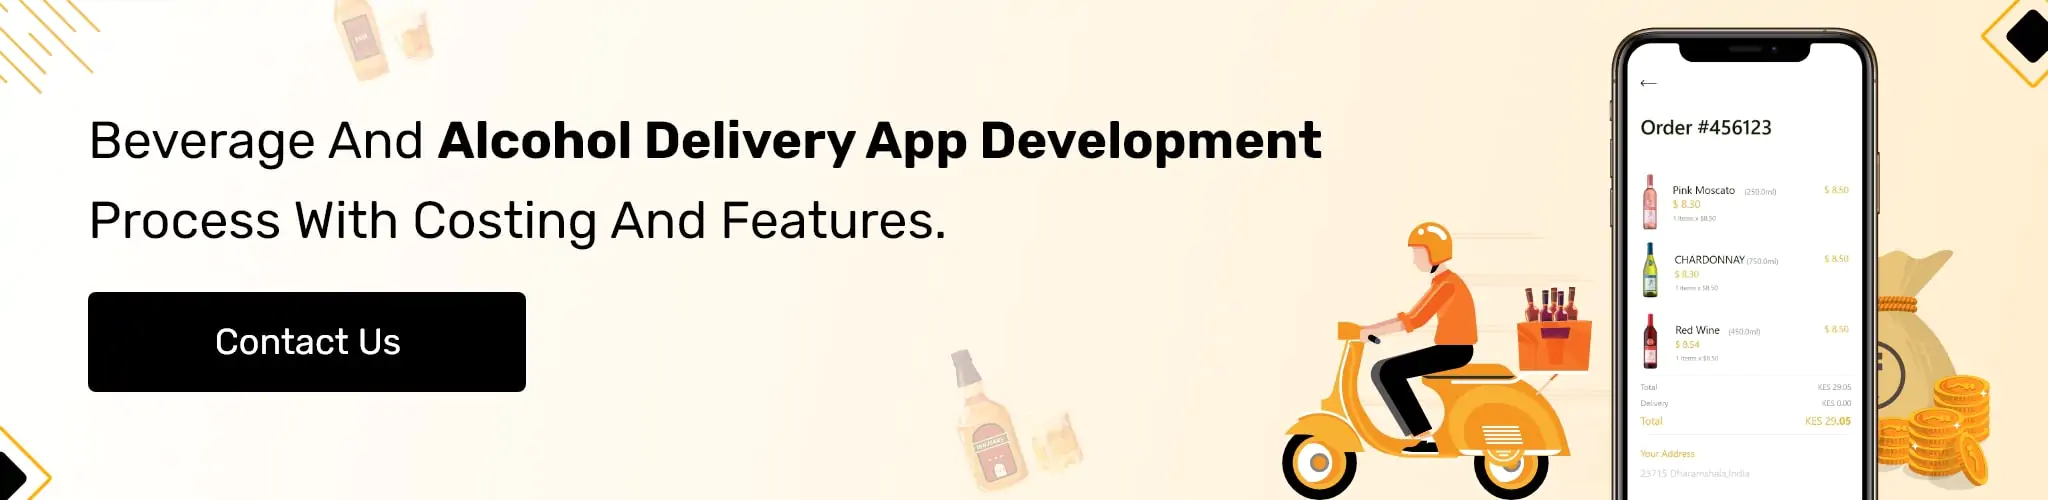 alcohol Delivery app development features and cost